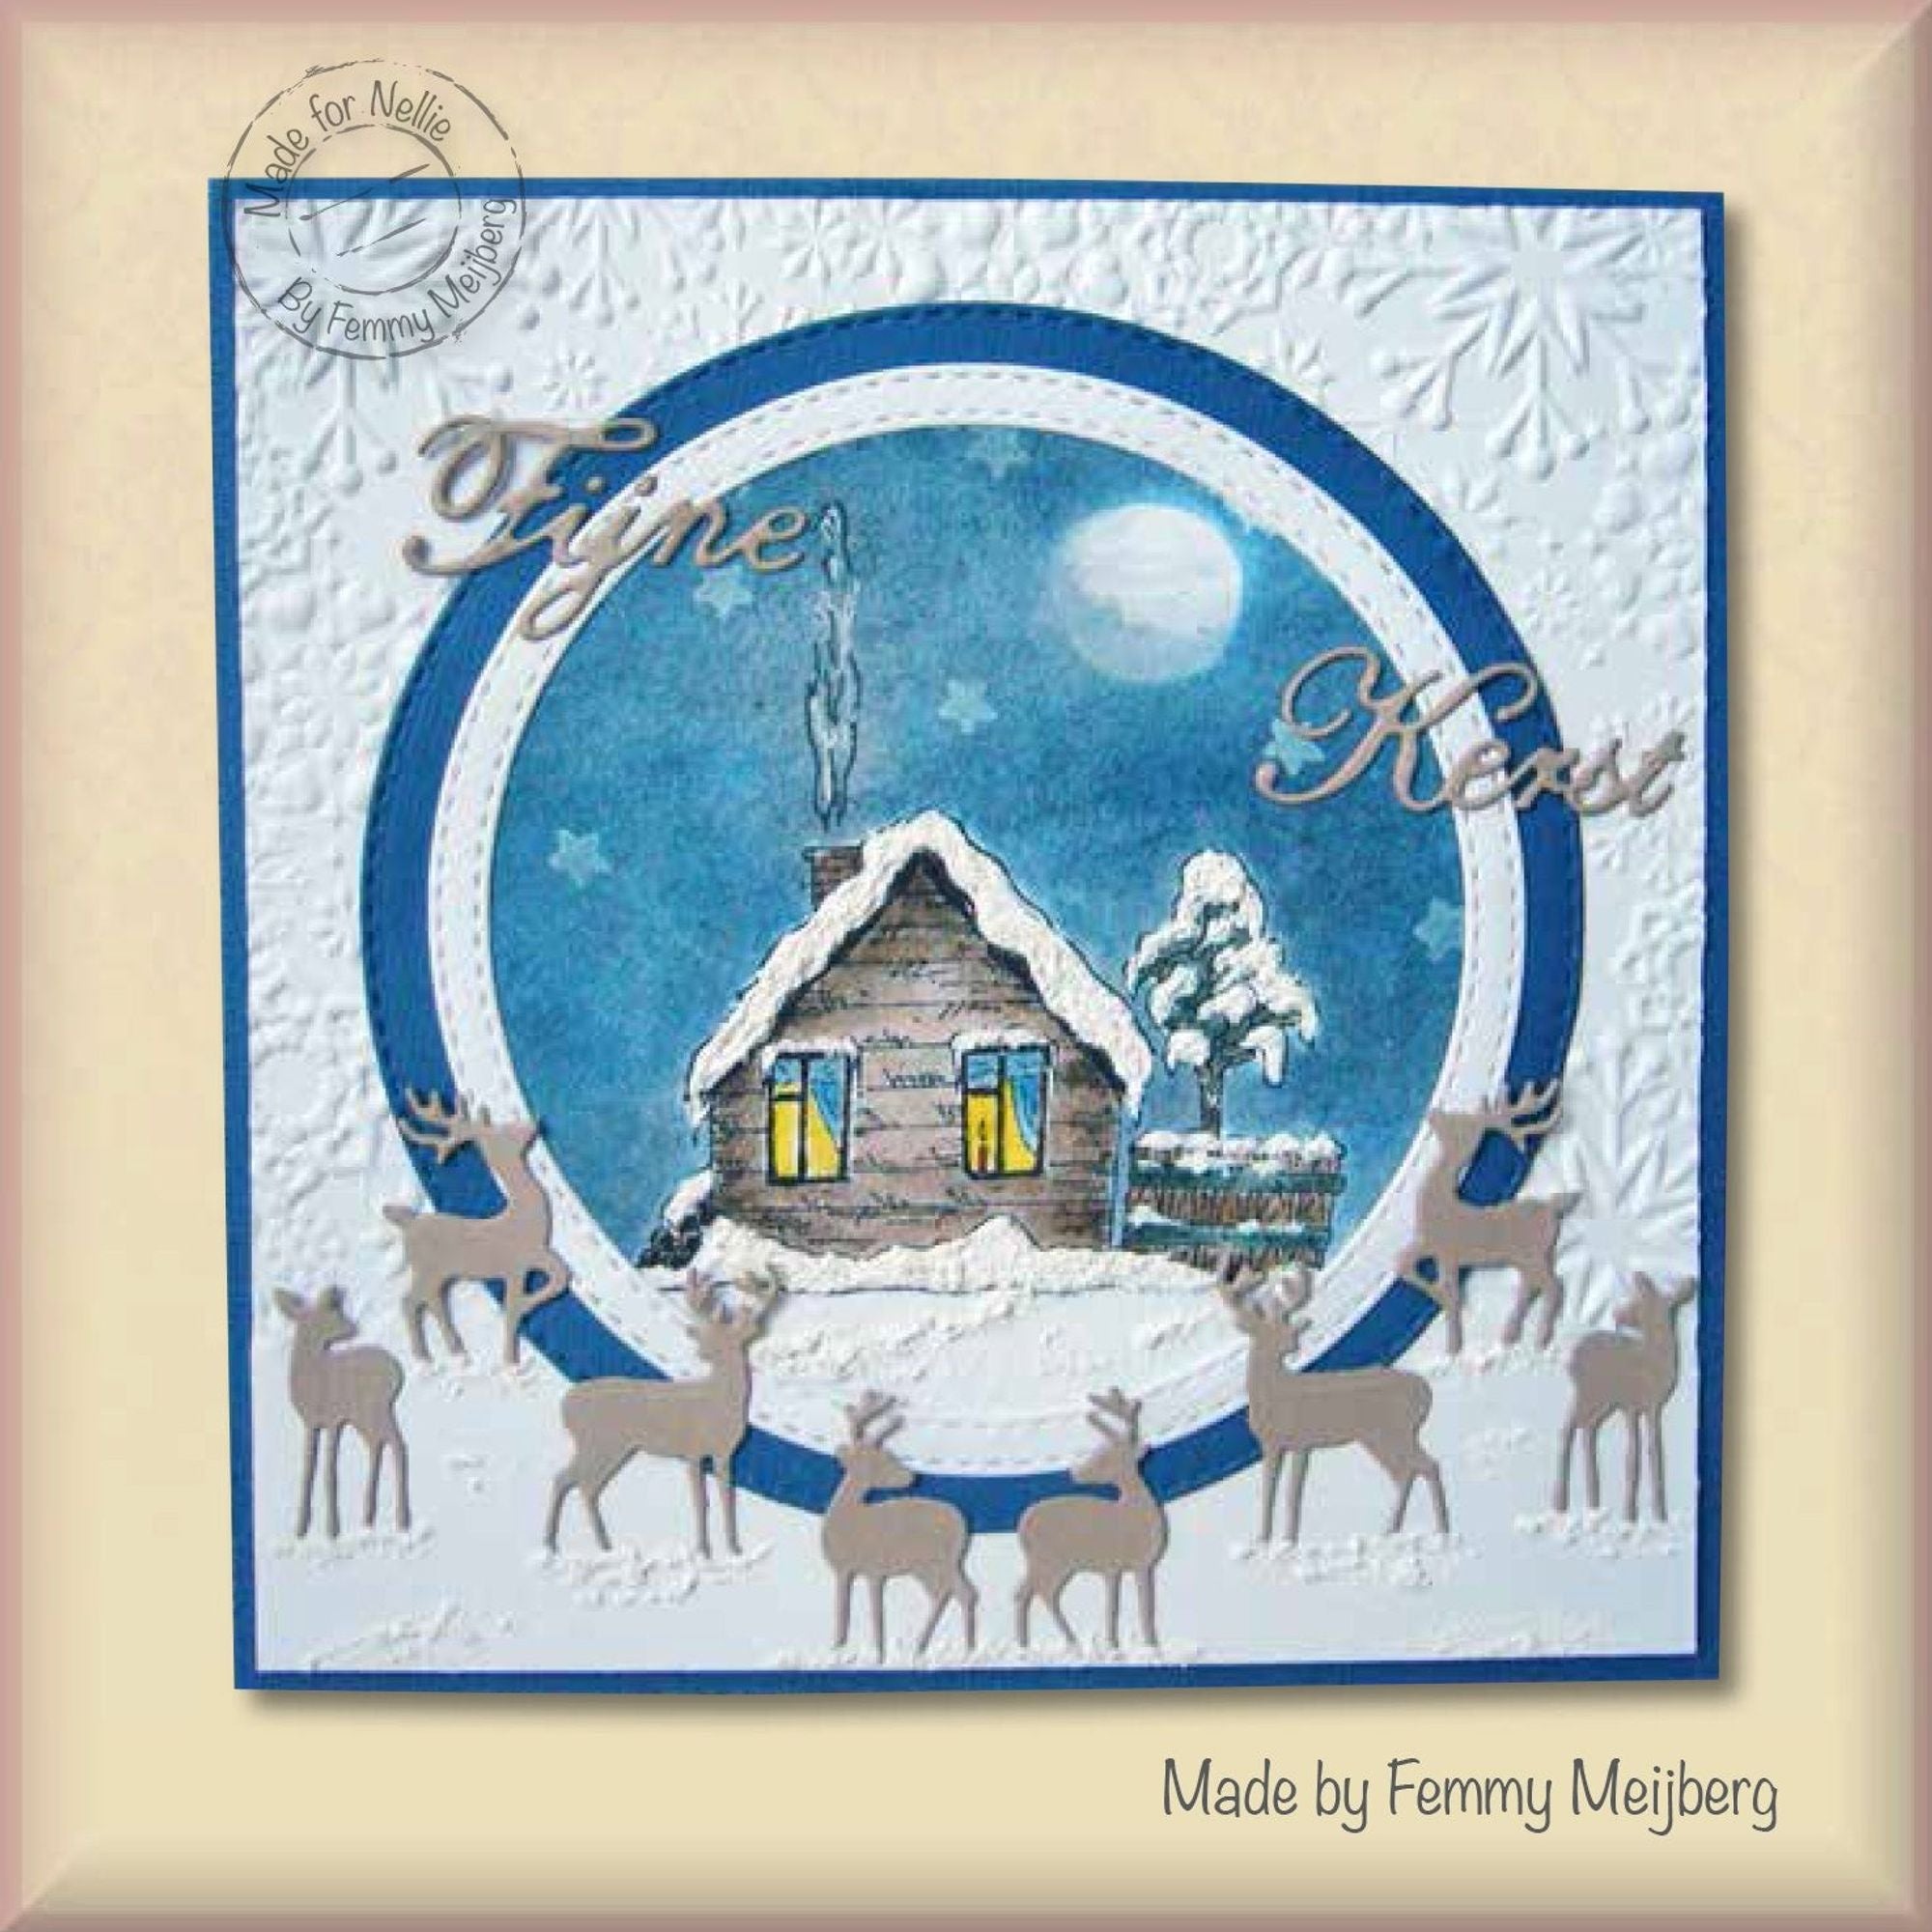 Nellie's Choice Clear Stamp Christmas Time - Snowy Cottage-2